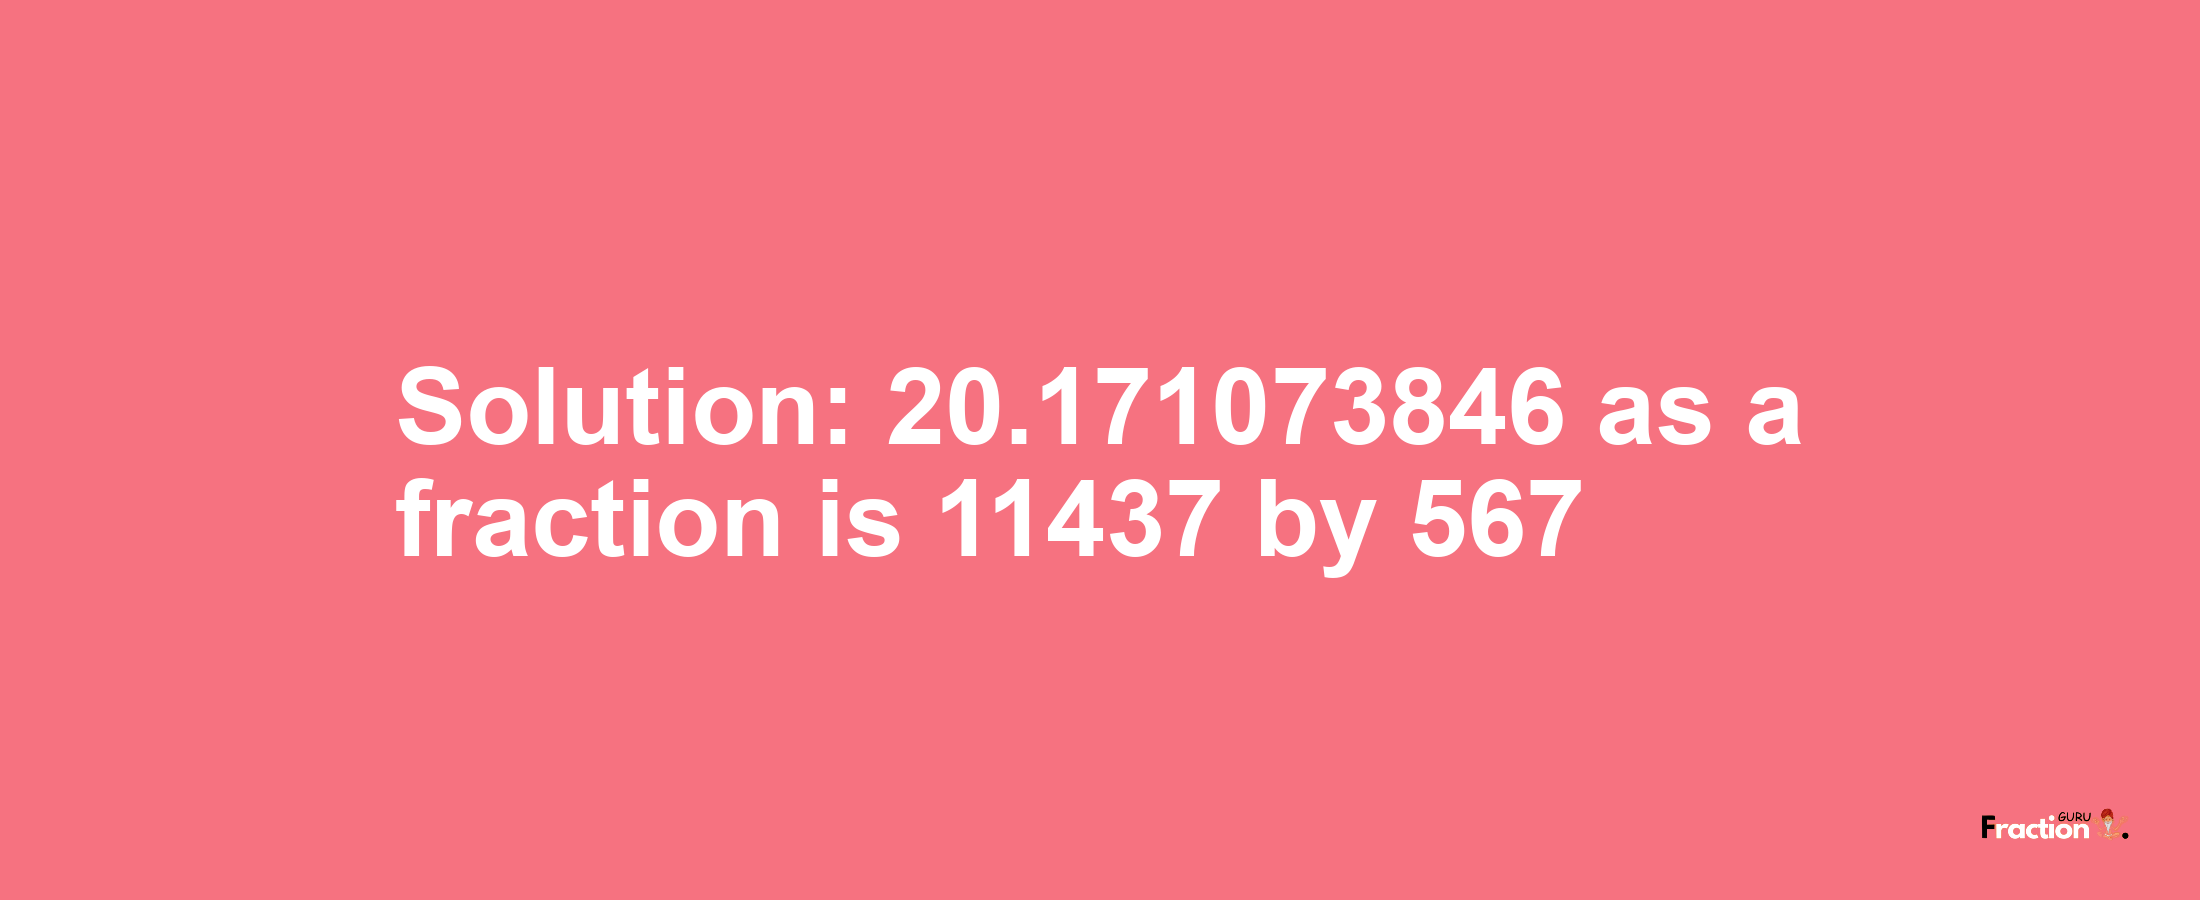 Solution:20.171073846 as a fraction is 11437/567